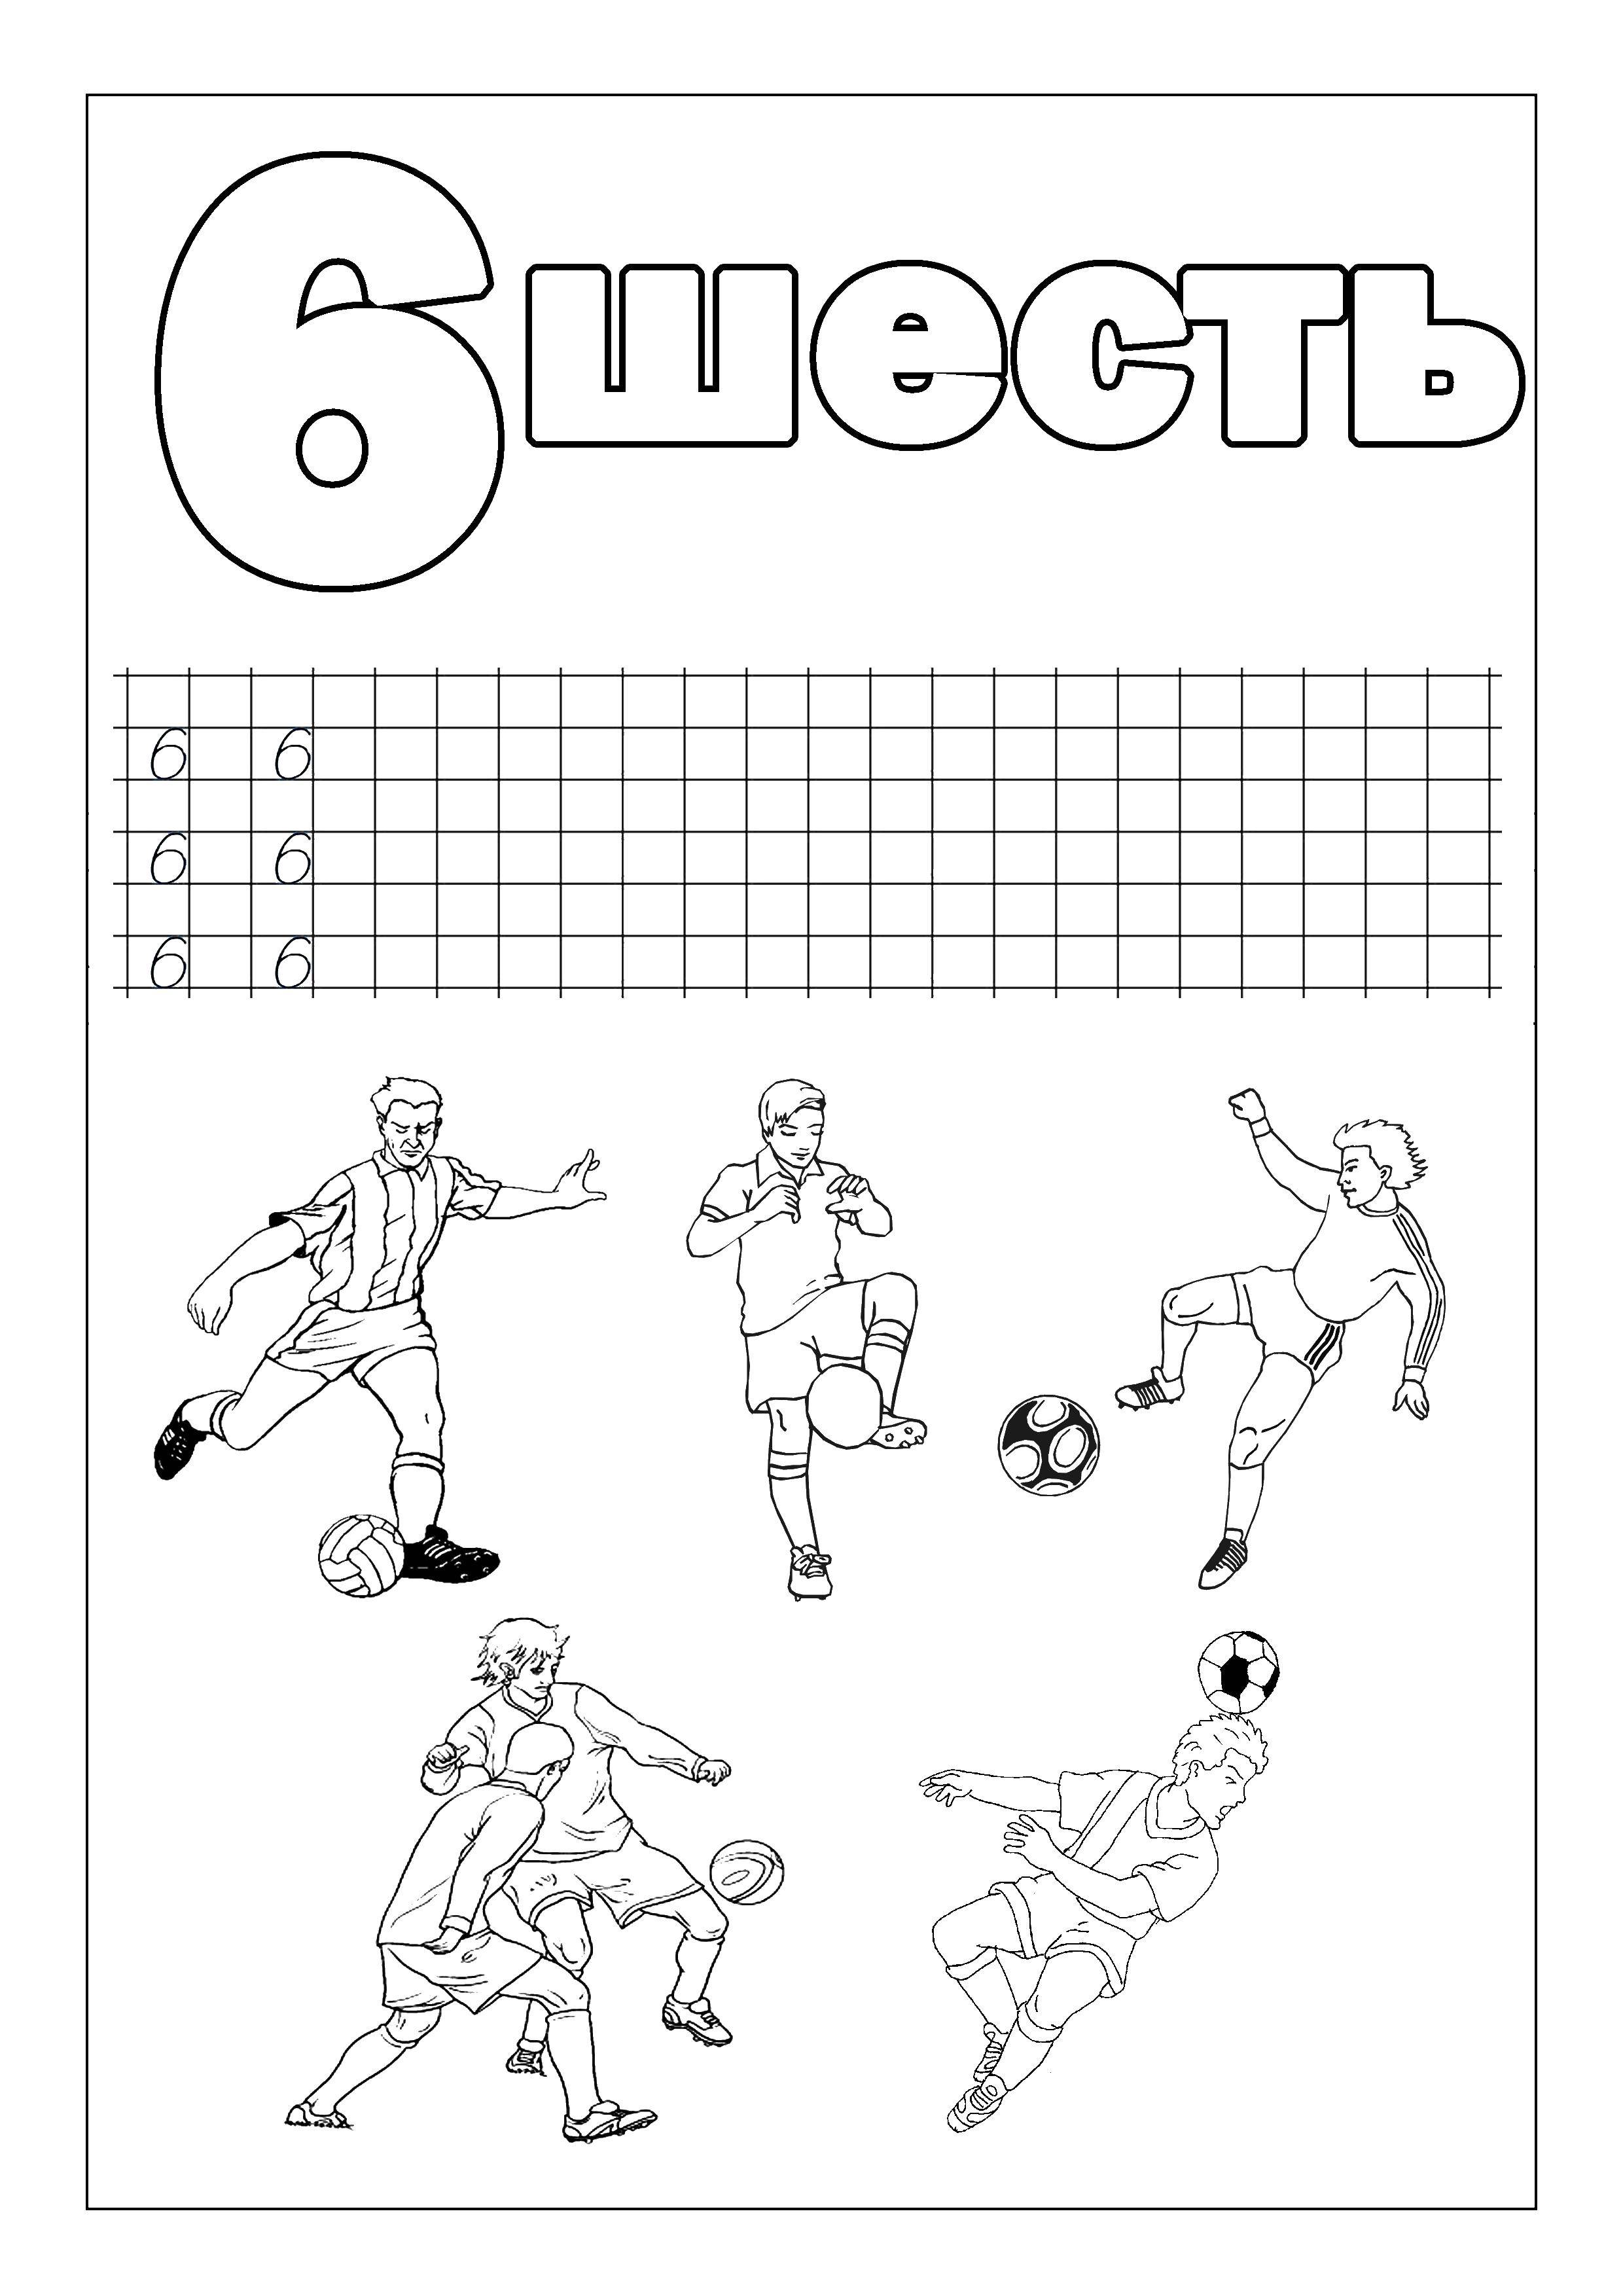 Coloring Recipe numbers 6. Category tracing numbers. Tags:  cursive; 6, numbers, players.